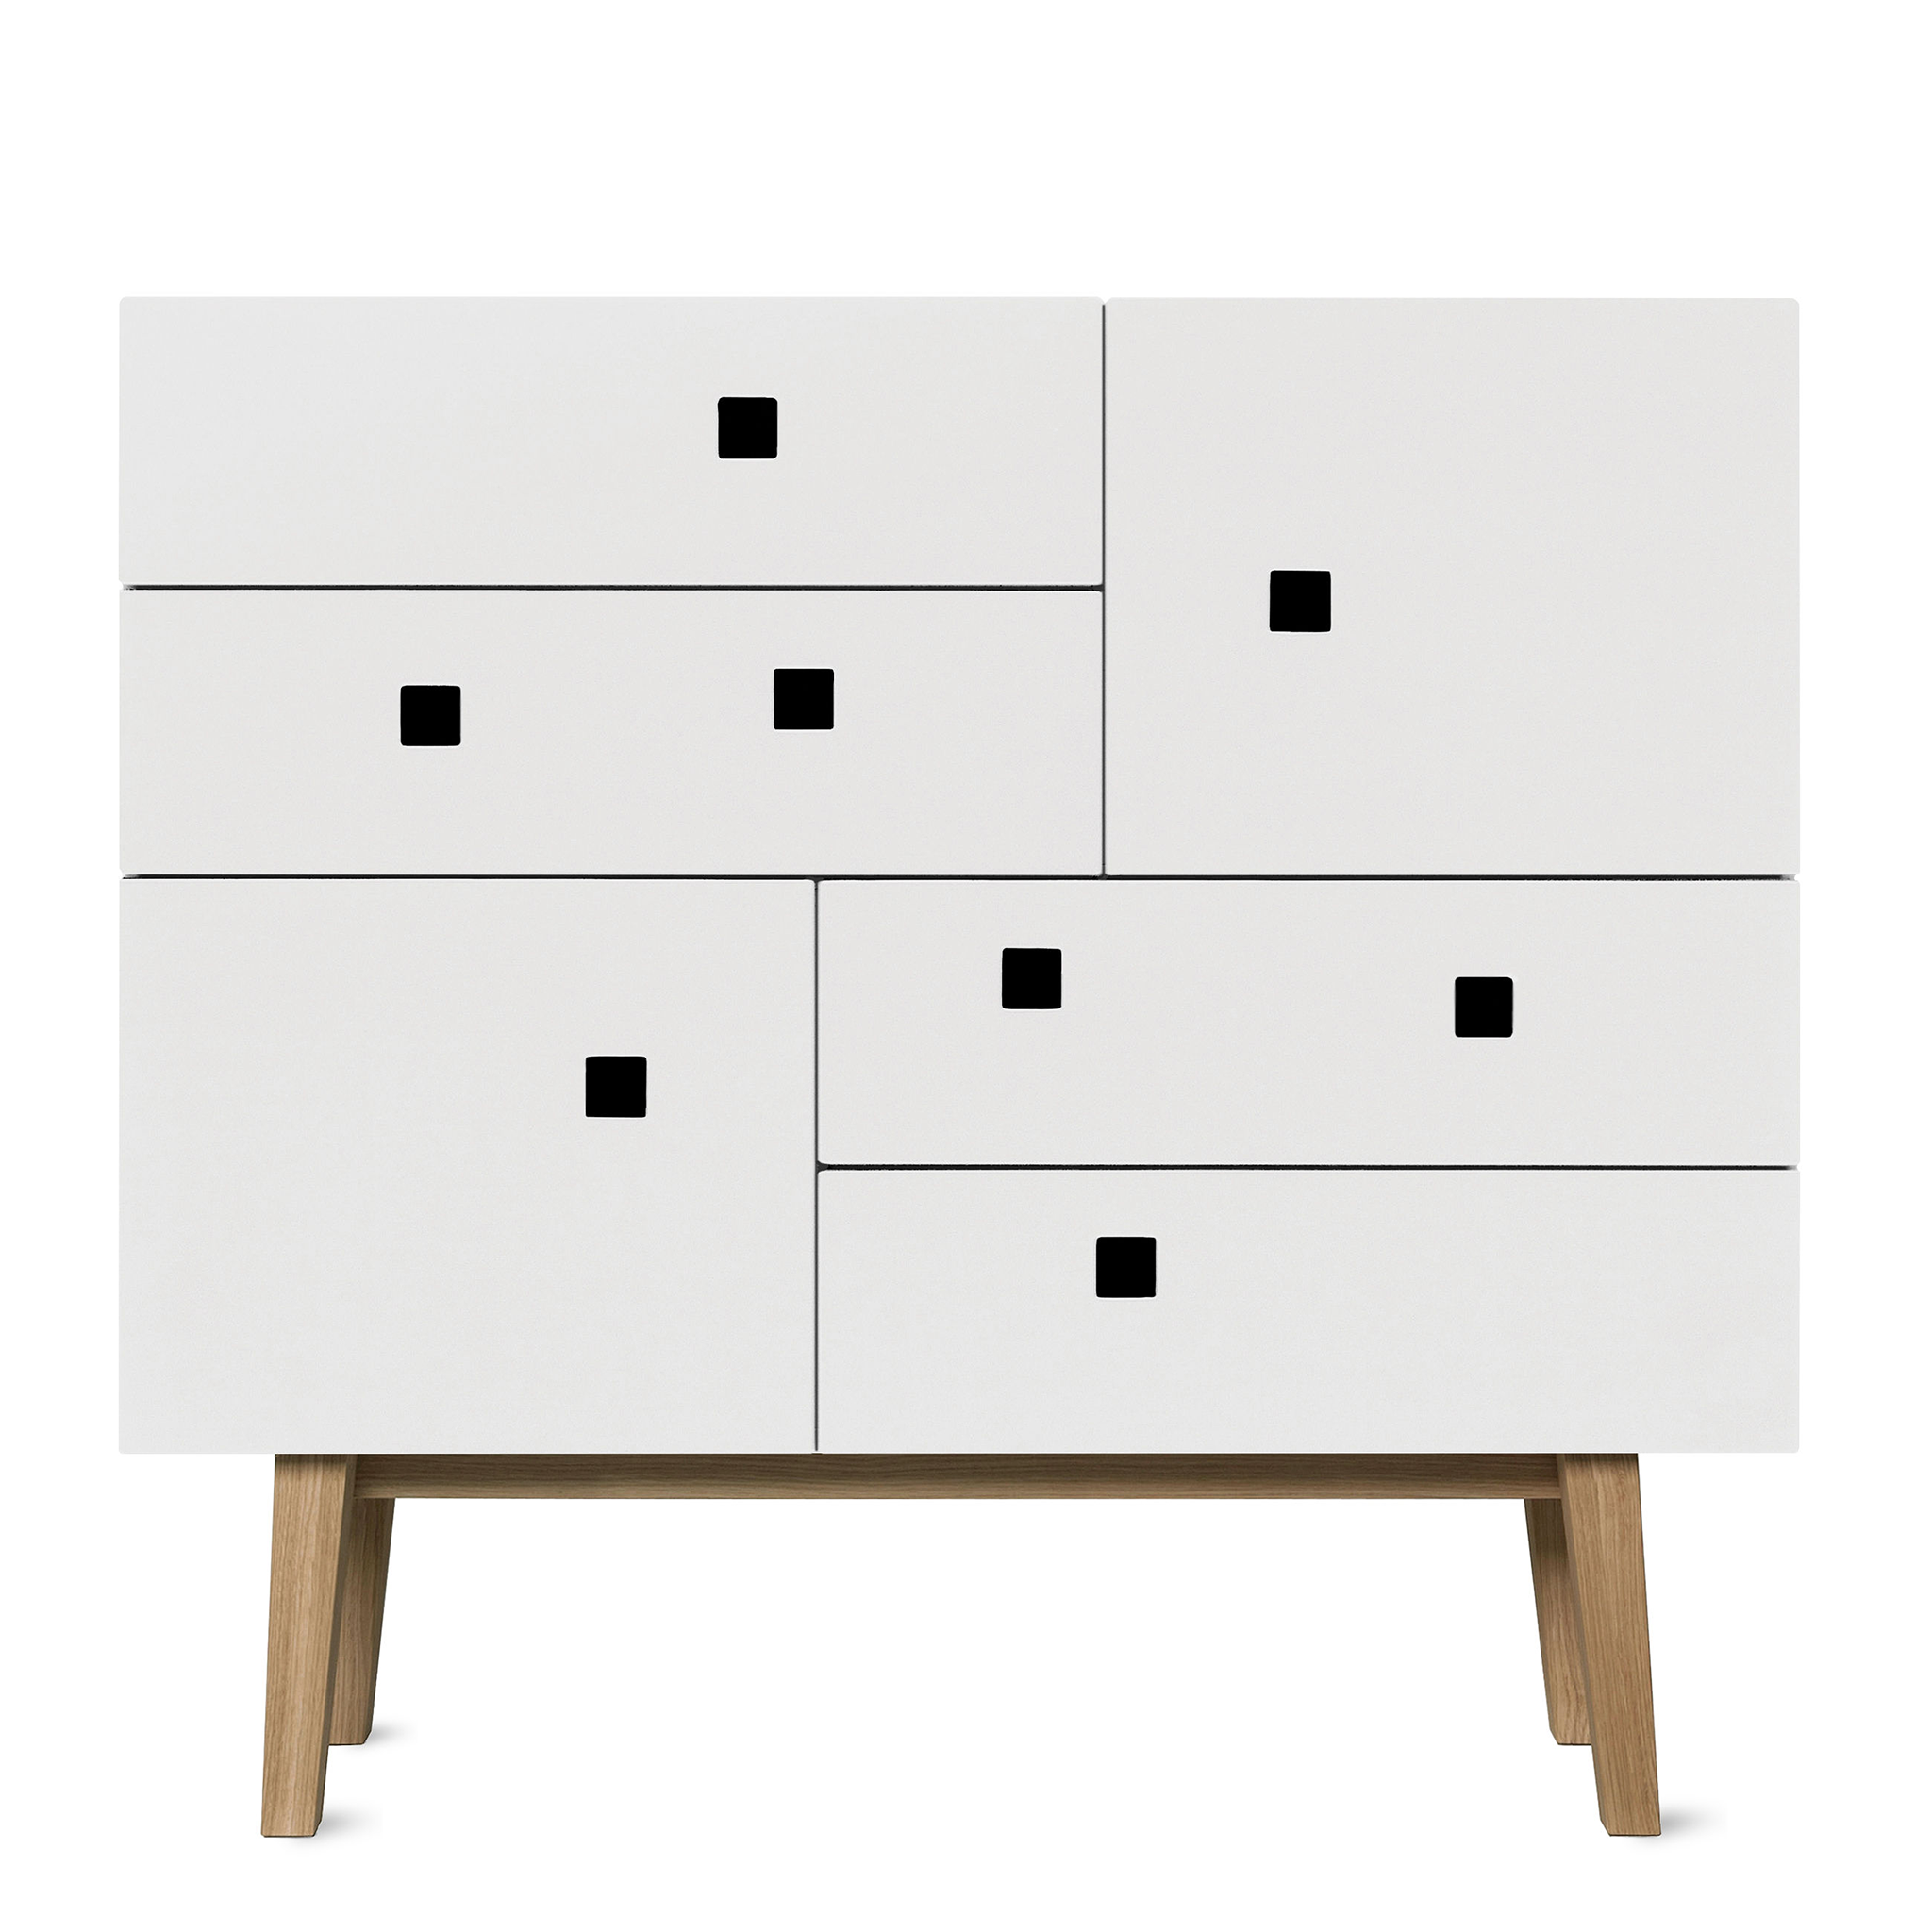 Peep B1 Chest of Drawers by Zweed